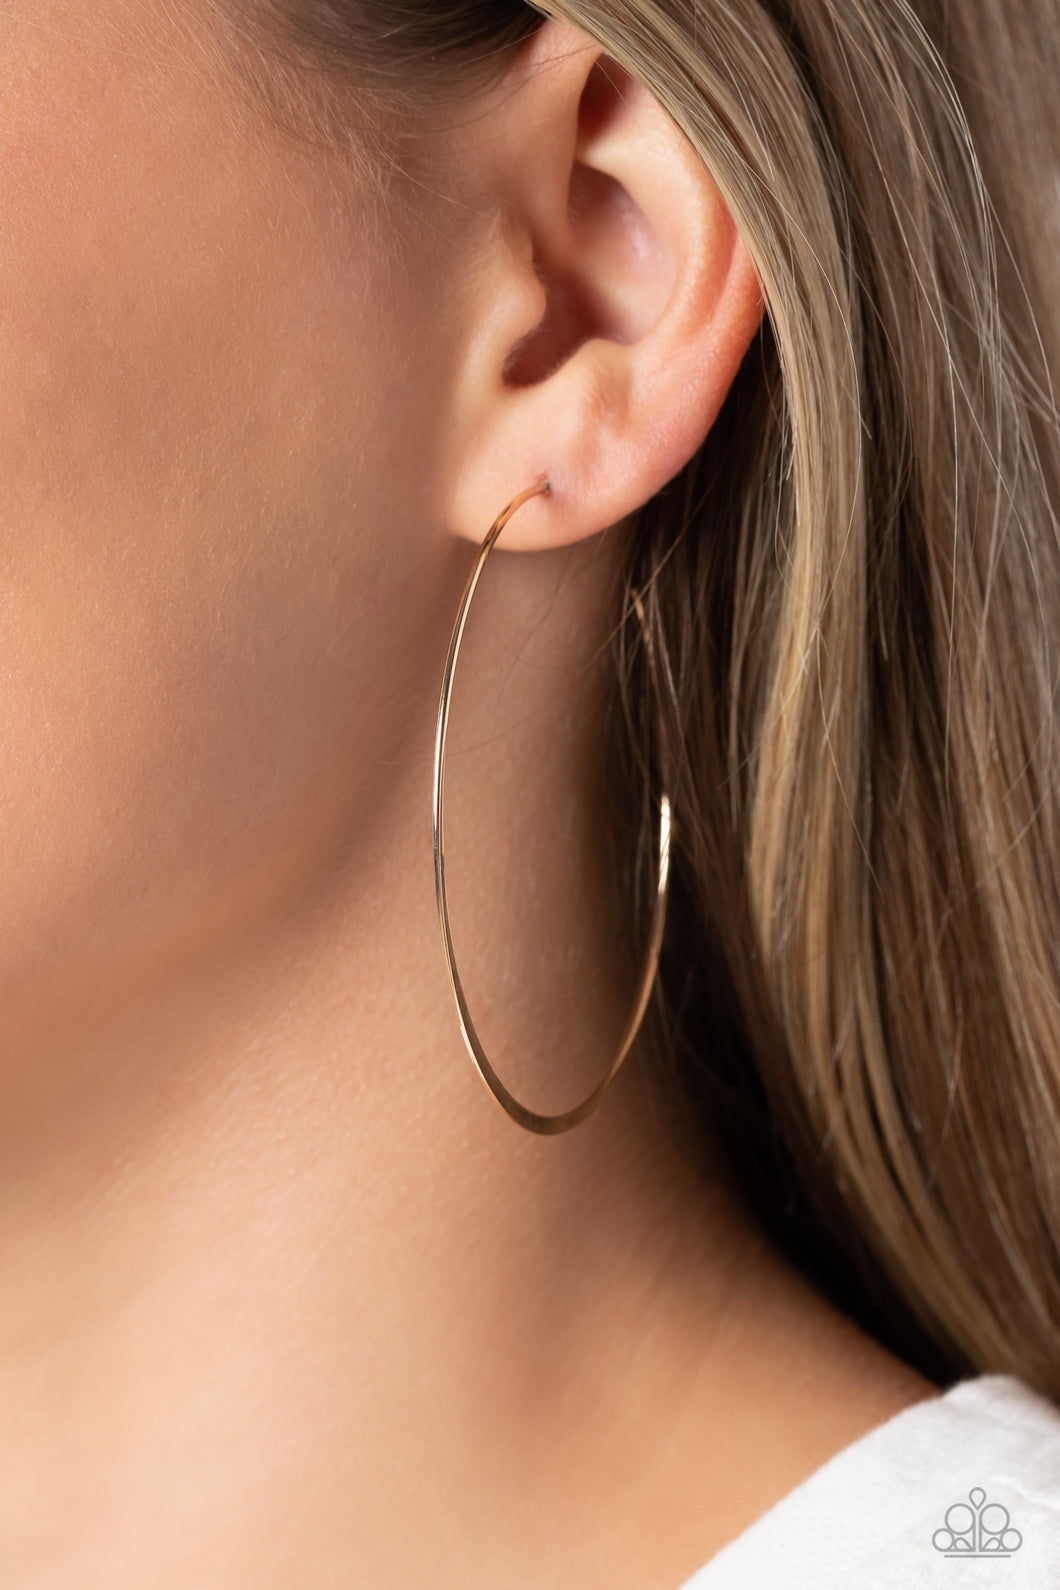 Featuring a high-sheen, a slightly flared, thin smooth gold bar curves into an oversized hoop resulting in a basic staple piece. Earring attaches to a standard post fitting. Hoop measures approximately 2 1/2